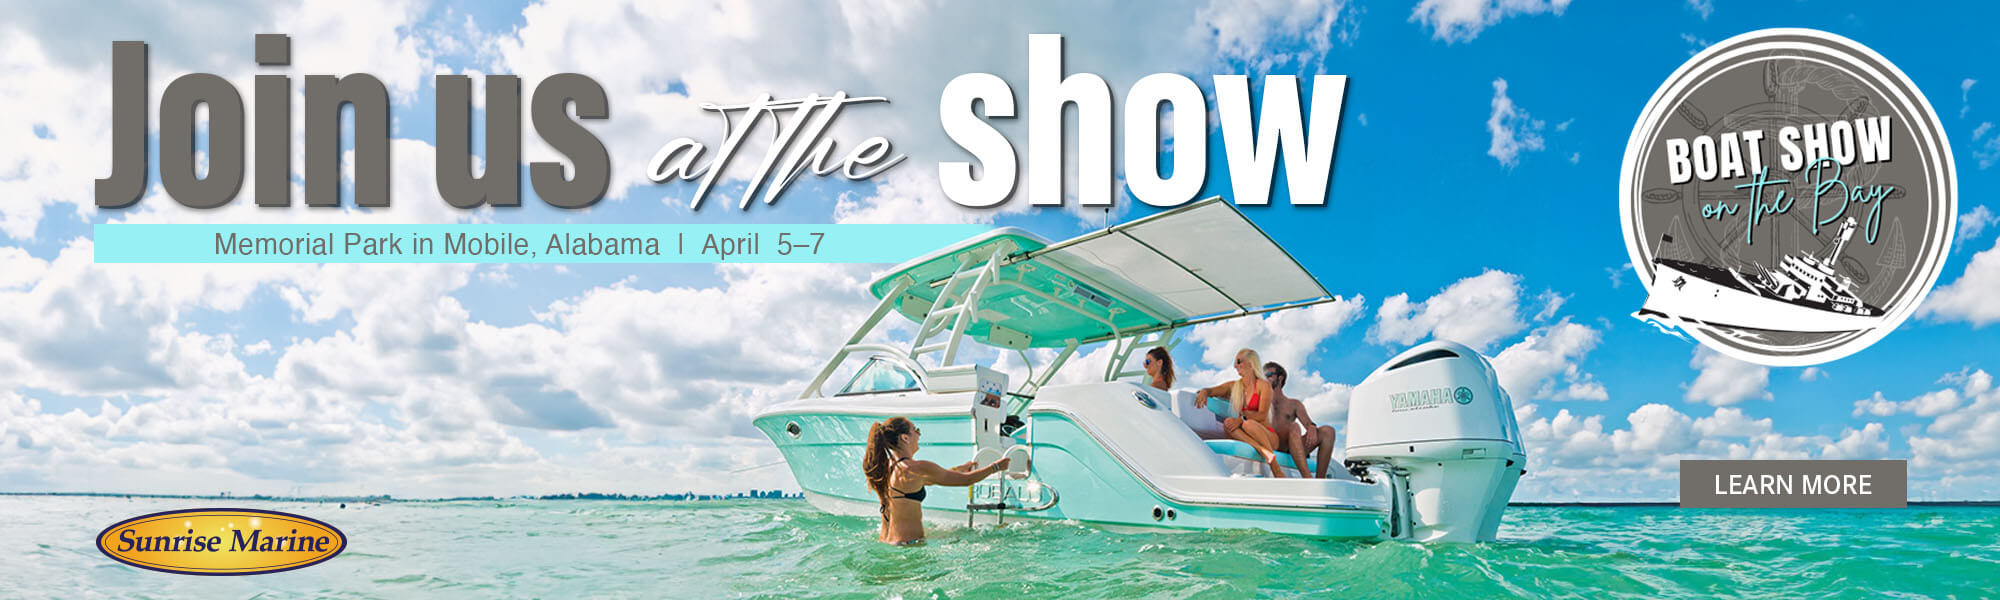 SM_Boat_Show_on_the_Bay_Email_R2_Desktop_2000_x_600-tinified